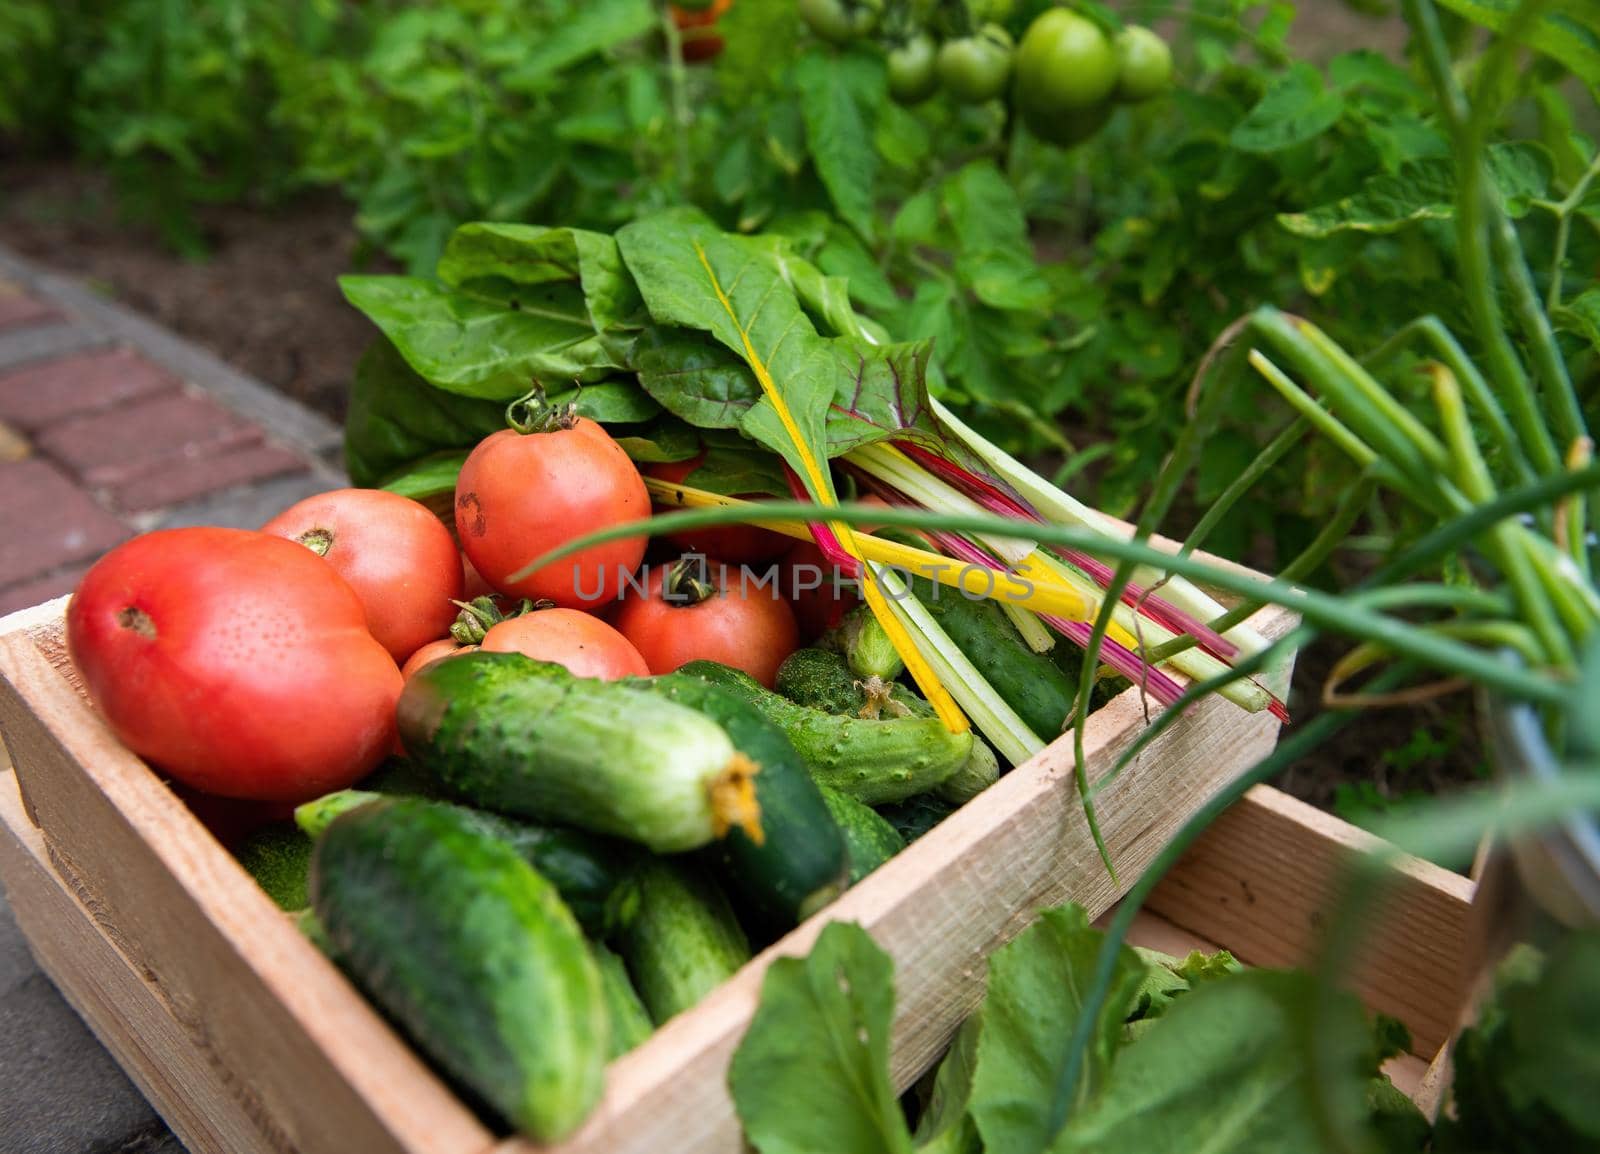 Close-up. Wooden box with harvested organic vegetables, grown in an eco farm, for sales in farmer's markets. Still life, close-up. Homegrown ripe juicy tomatoes, cucumbers and swiss chard green leaves